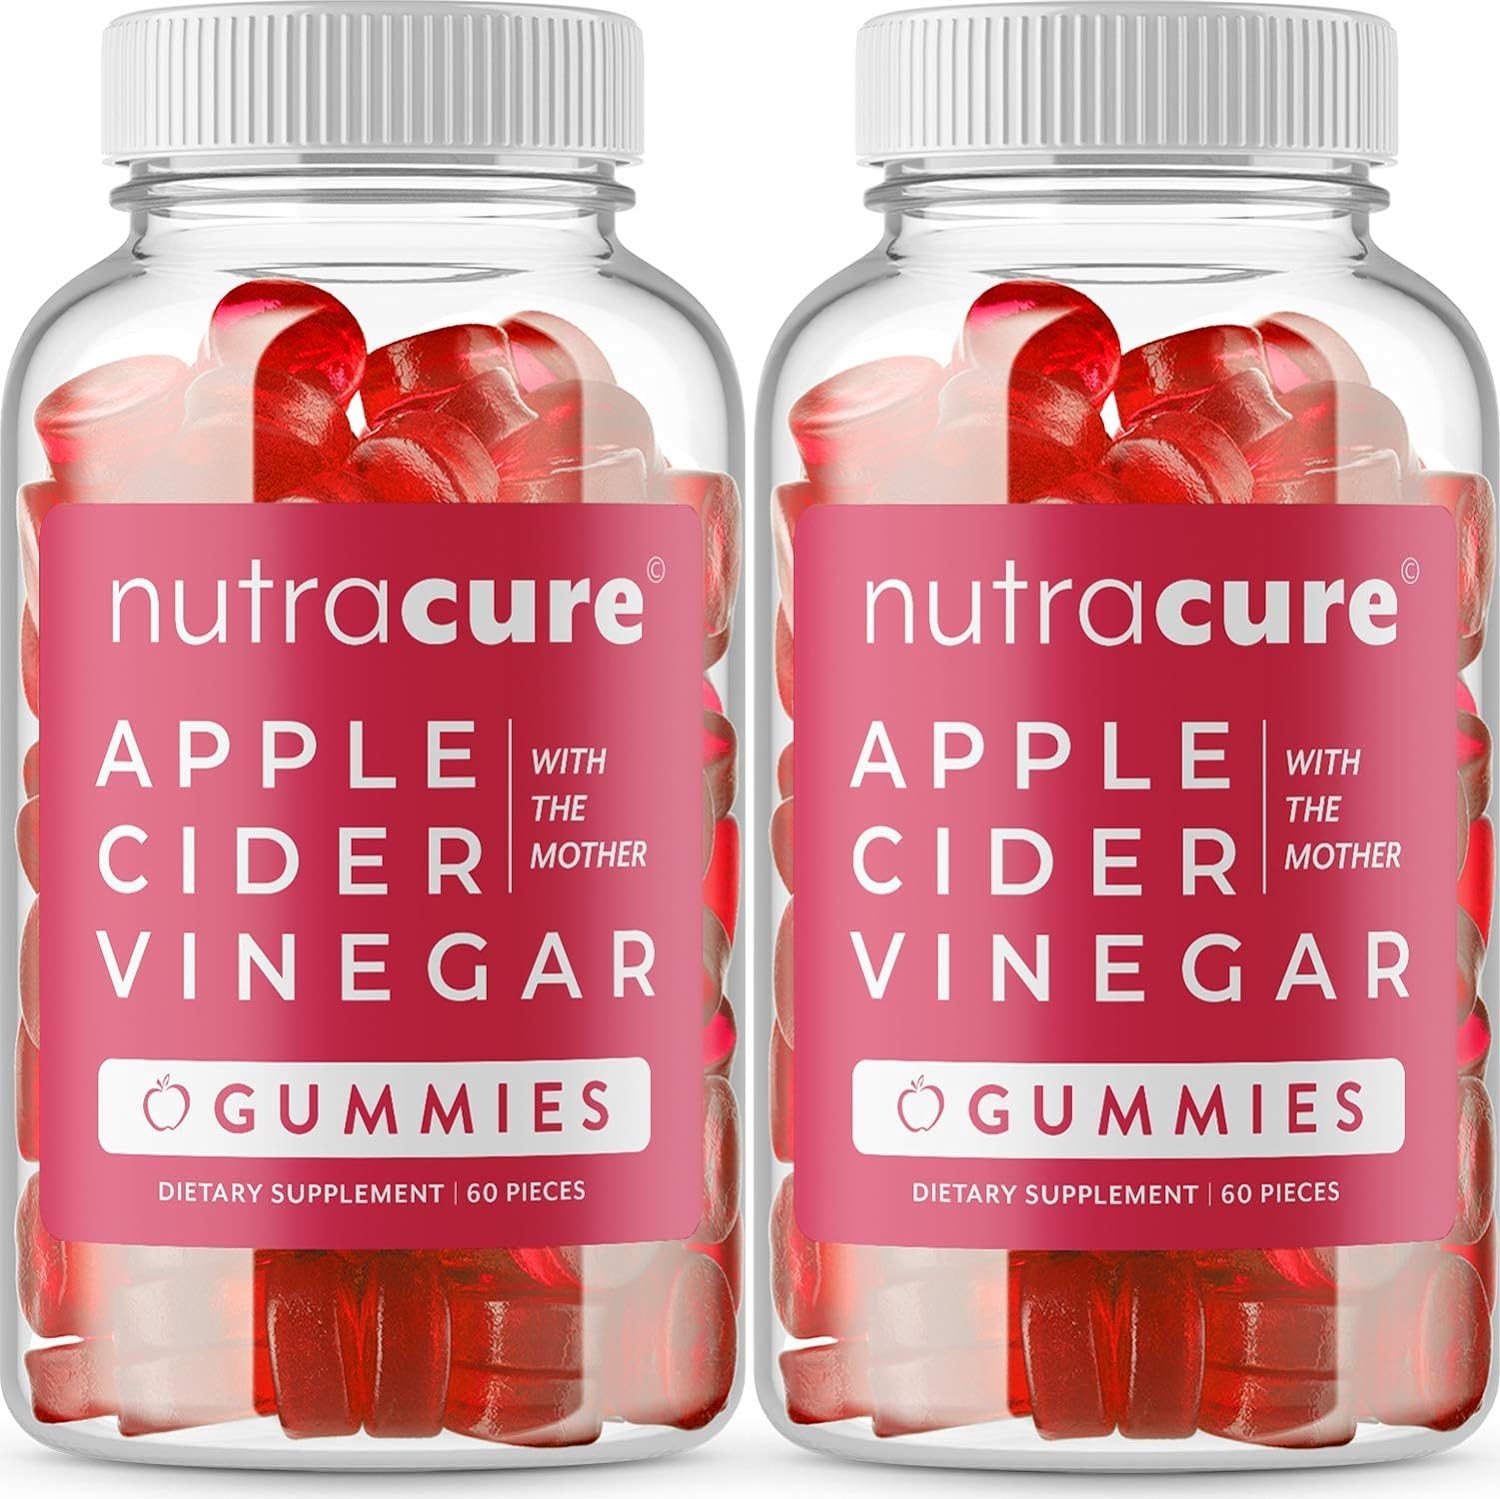 Apple Cider Vinegar Gummies For Weight Loss. (2-Pack) Nutracure Apple Cider Vinegar Gummies for Weight Loss, Detox, & Cleanse - Non-GMO ACV Gummies with The Mother